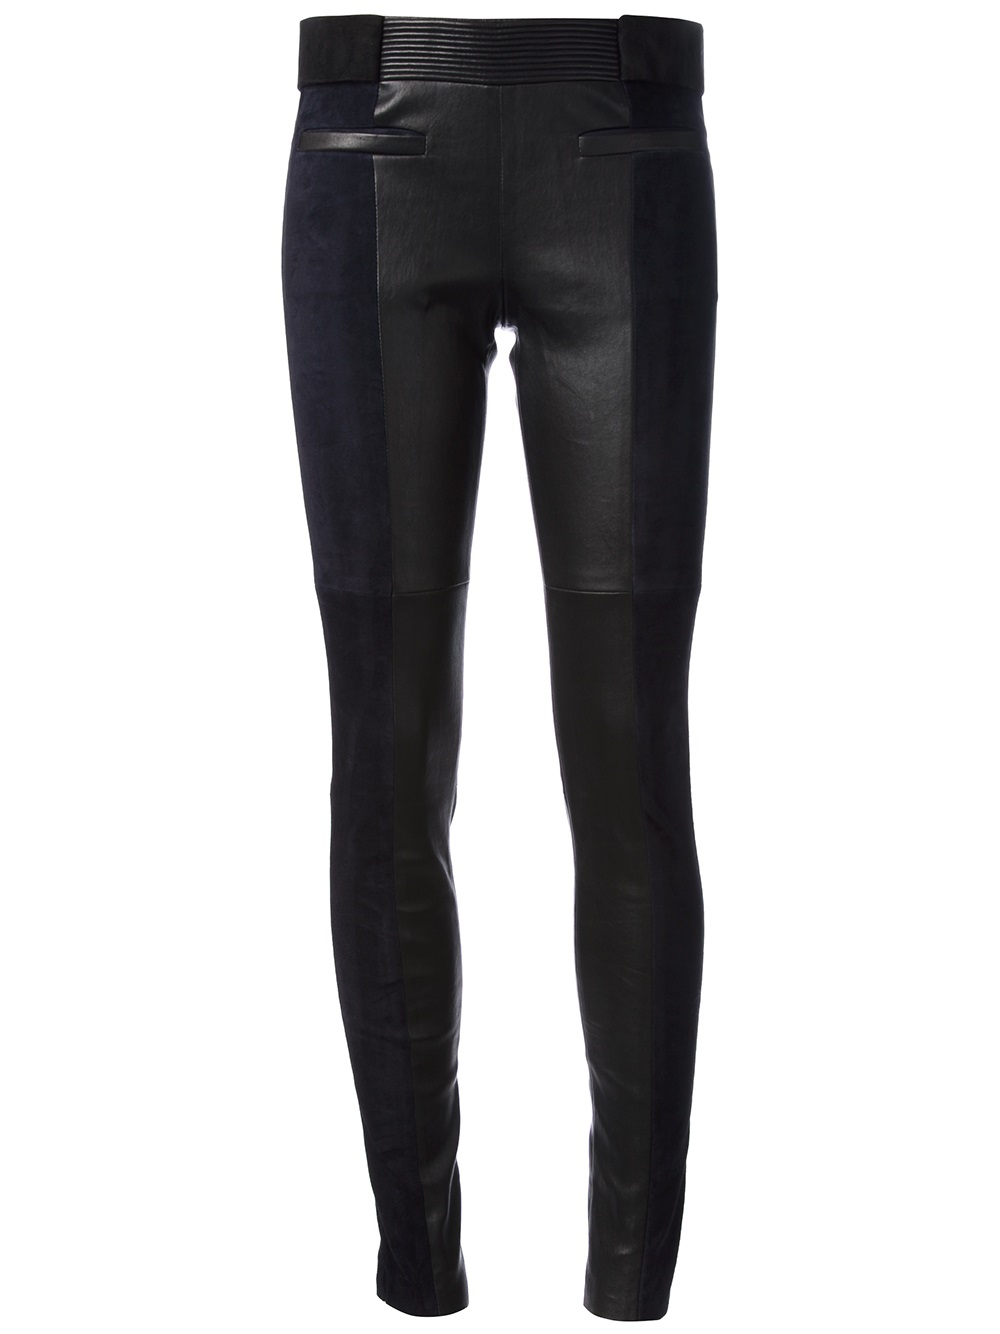 Isabel Marant Two-tone Trouser in Black - Lyst